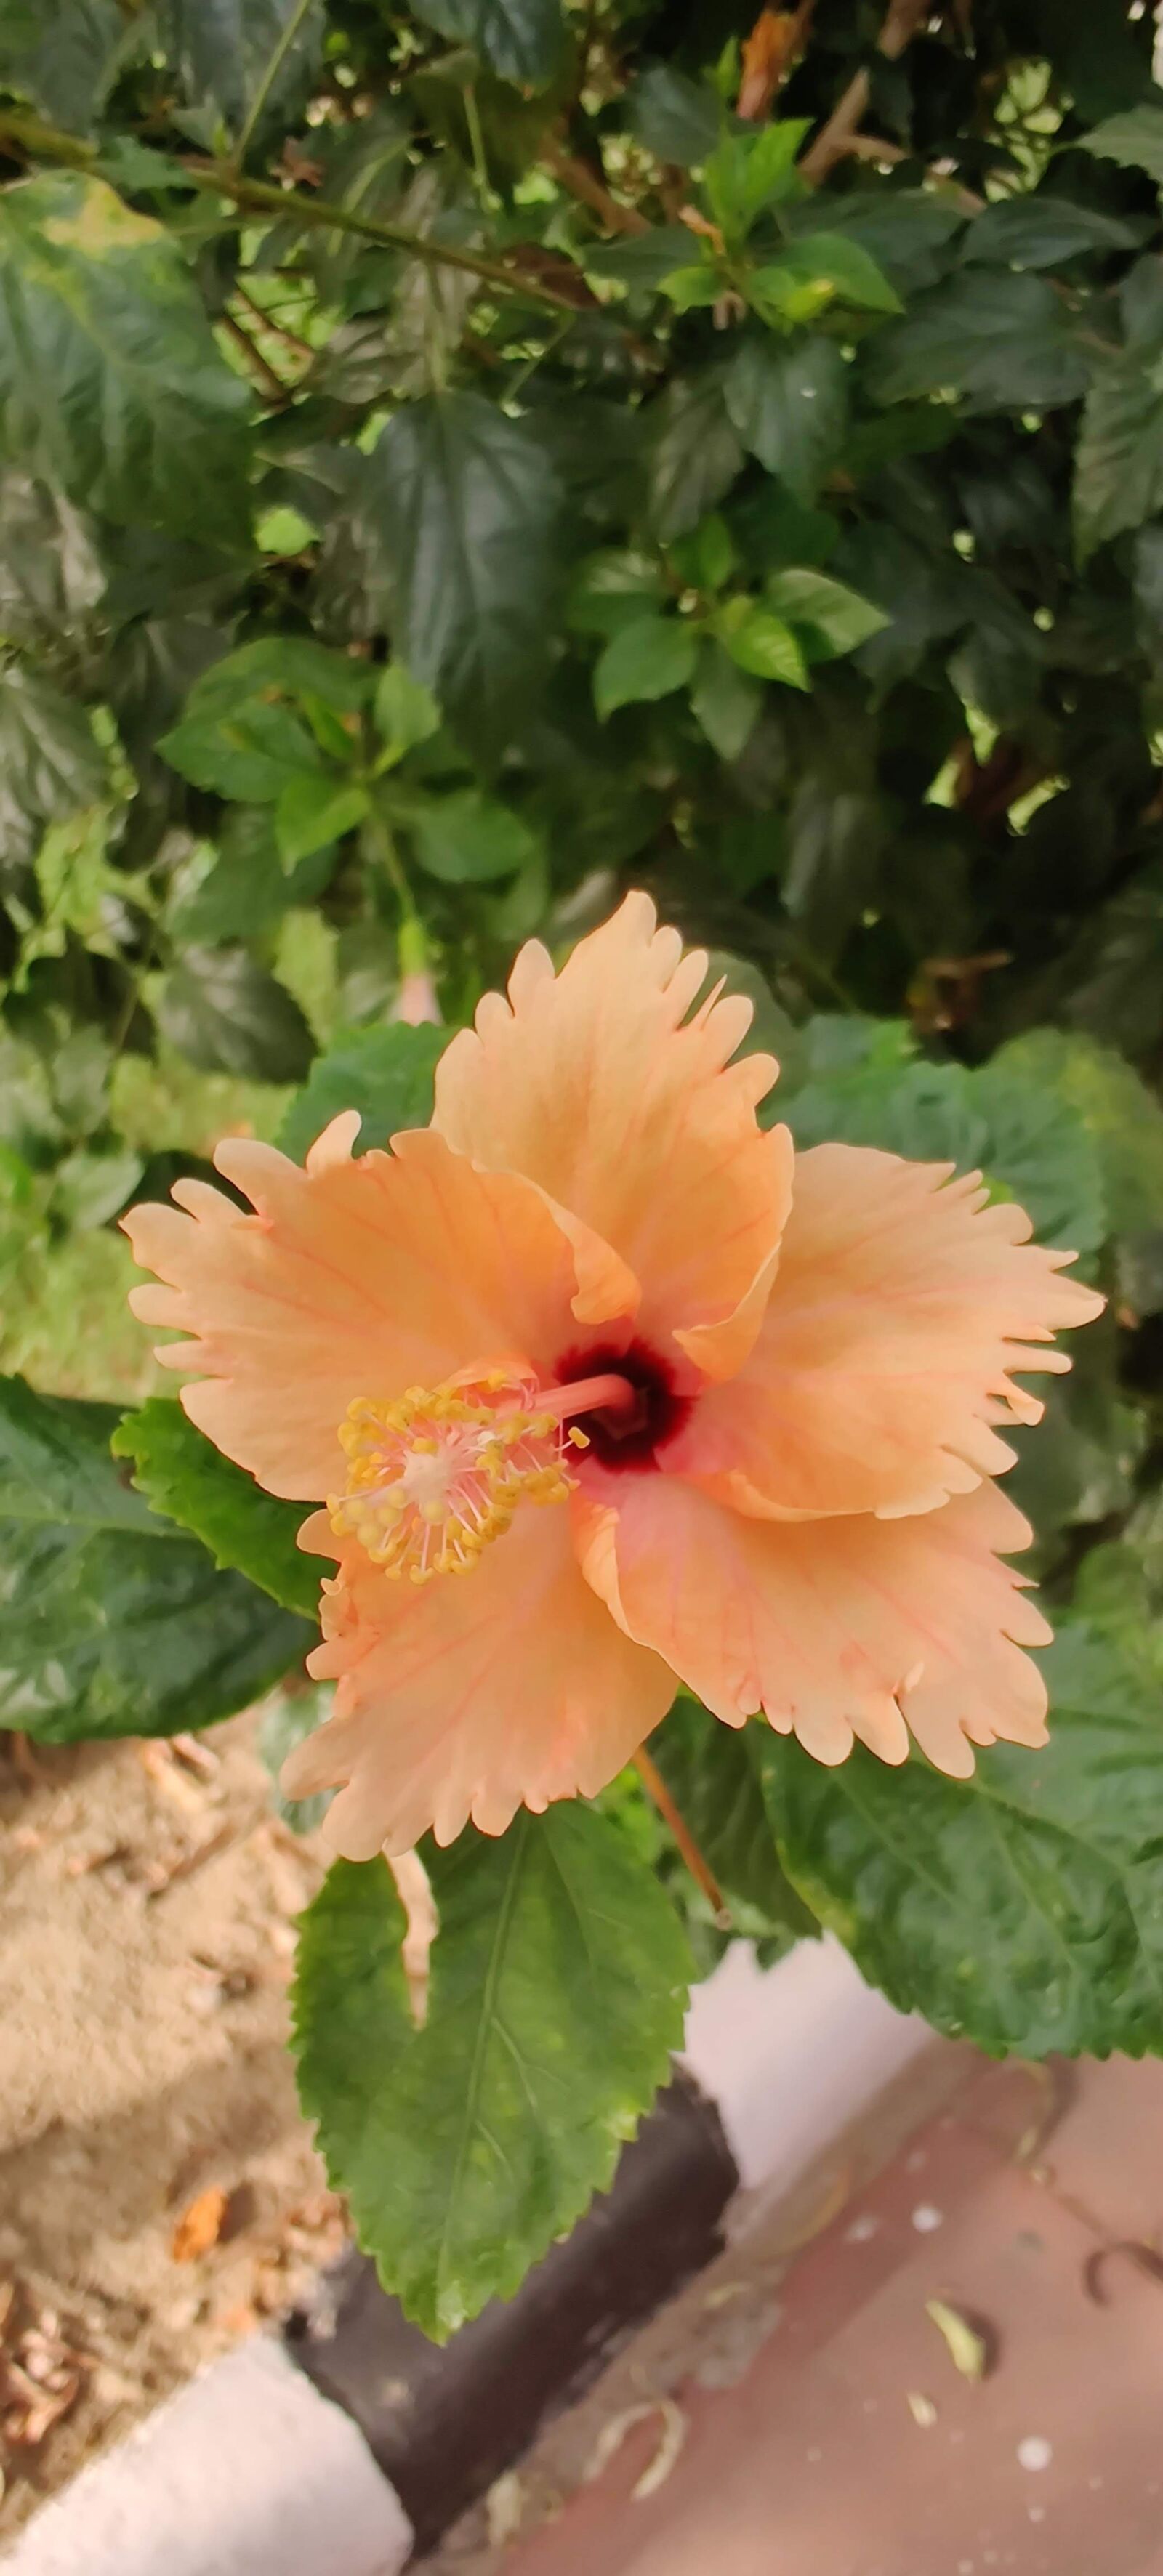 OnePlus HD1901 sample photo. Flower, summer, nature photography